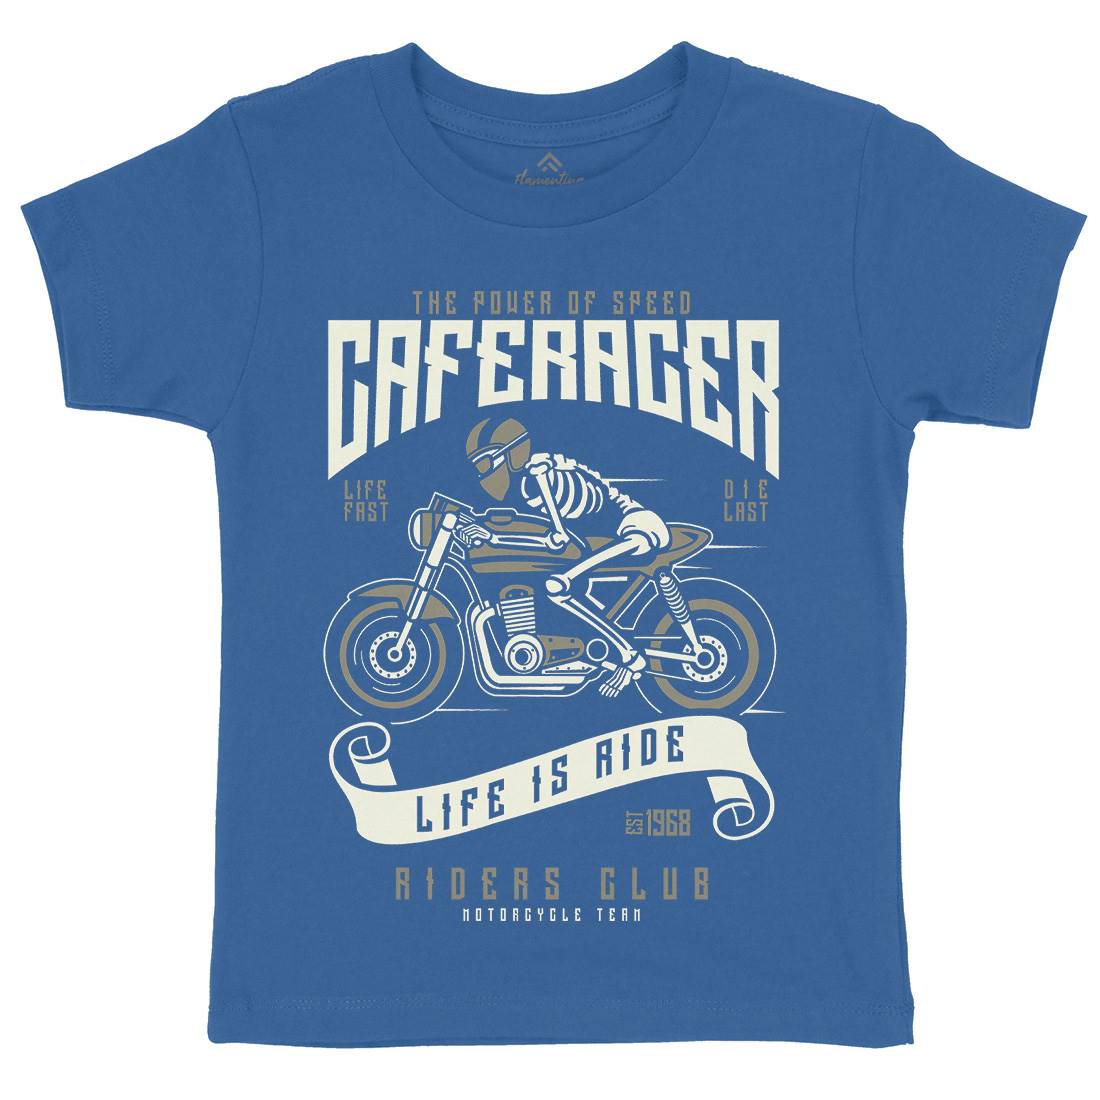 Speed Of Caferacer Kids Crew Neck T-Shirt Motorcycles A154